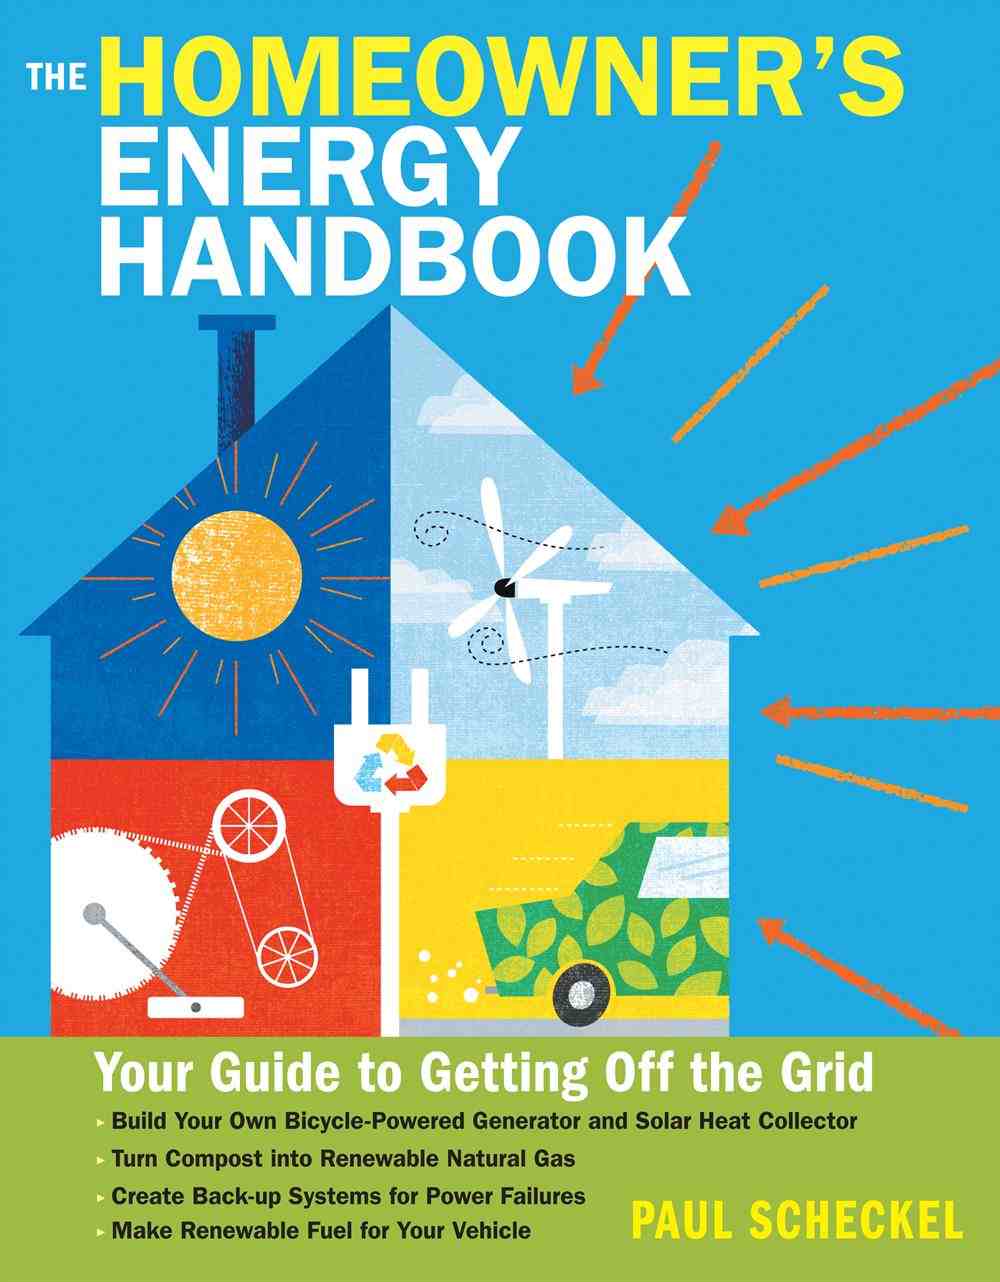 Homeowner's Energy Handbook: Your Guide To Getting Off the Grid